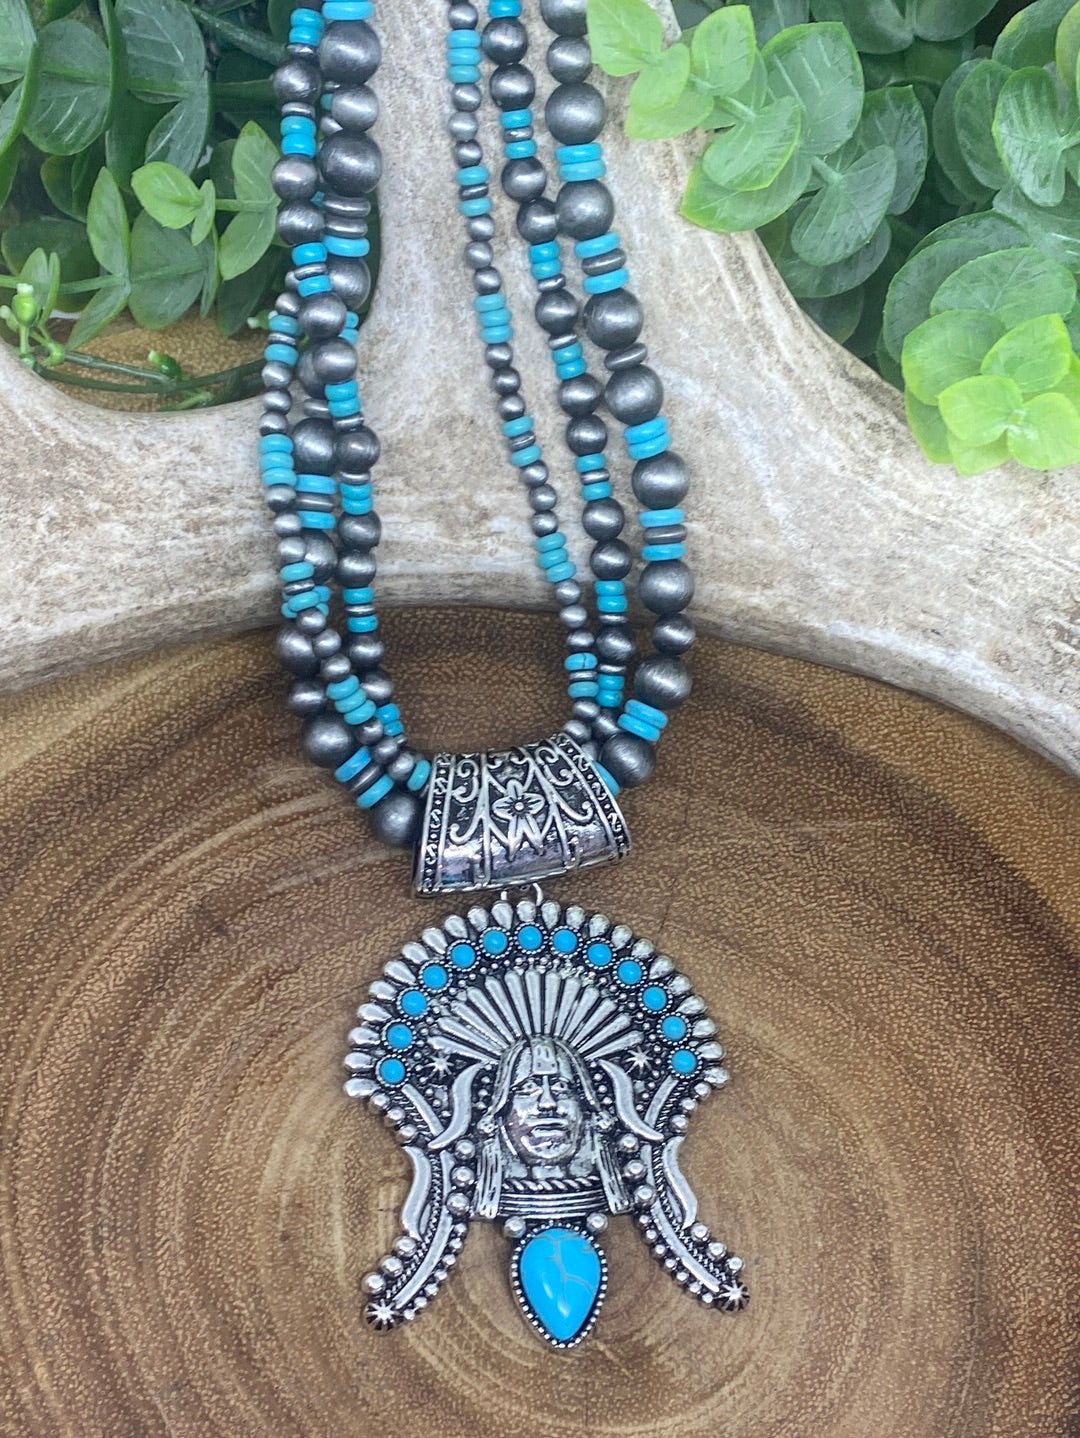 Stunning Navajo Jewelry Collection